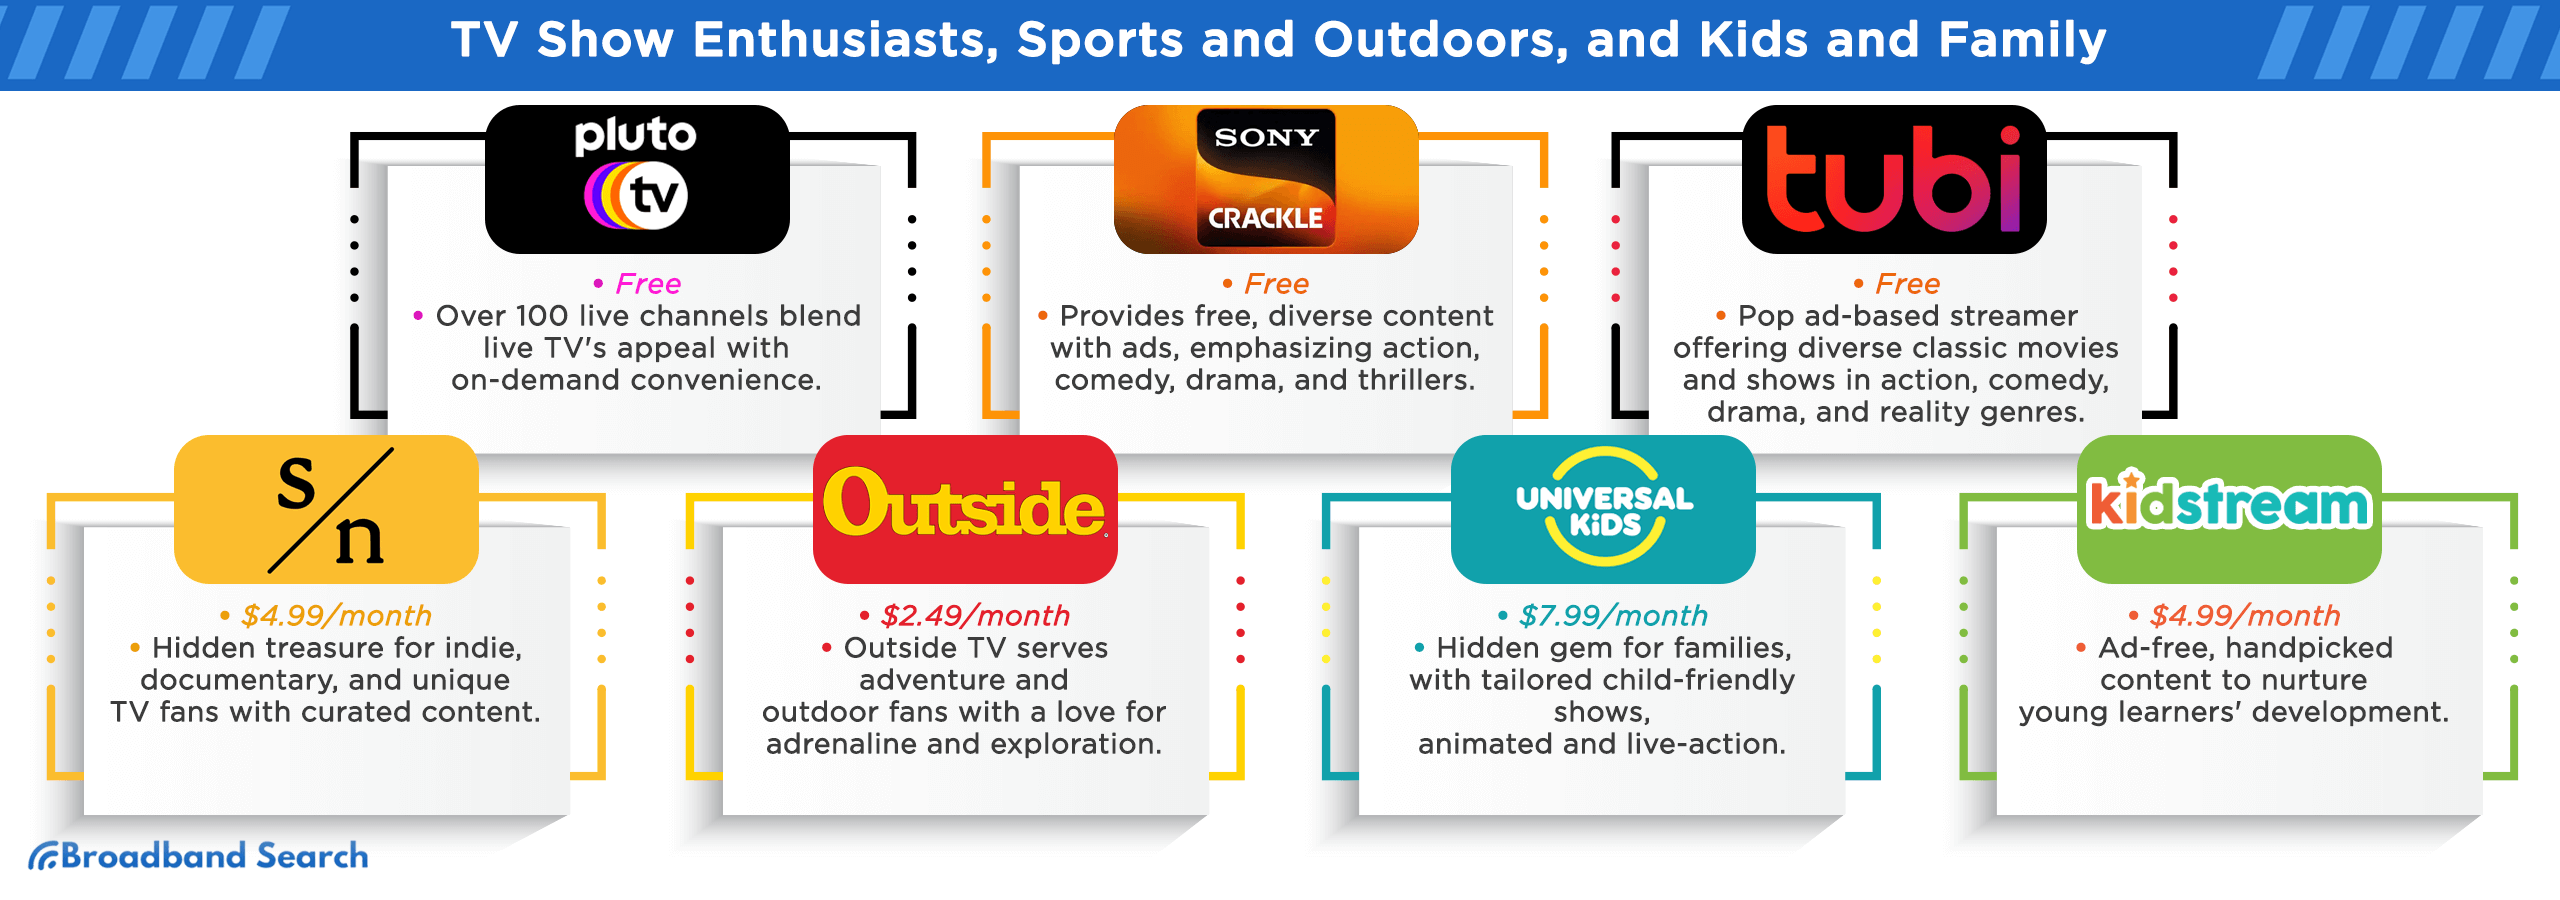 Details on Streaming services that specializes in TV shows, sports and outdoorsm and kids and family